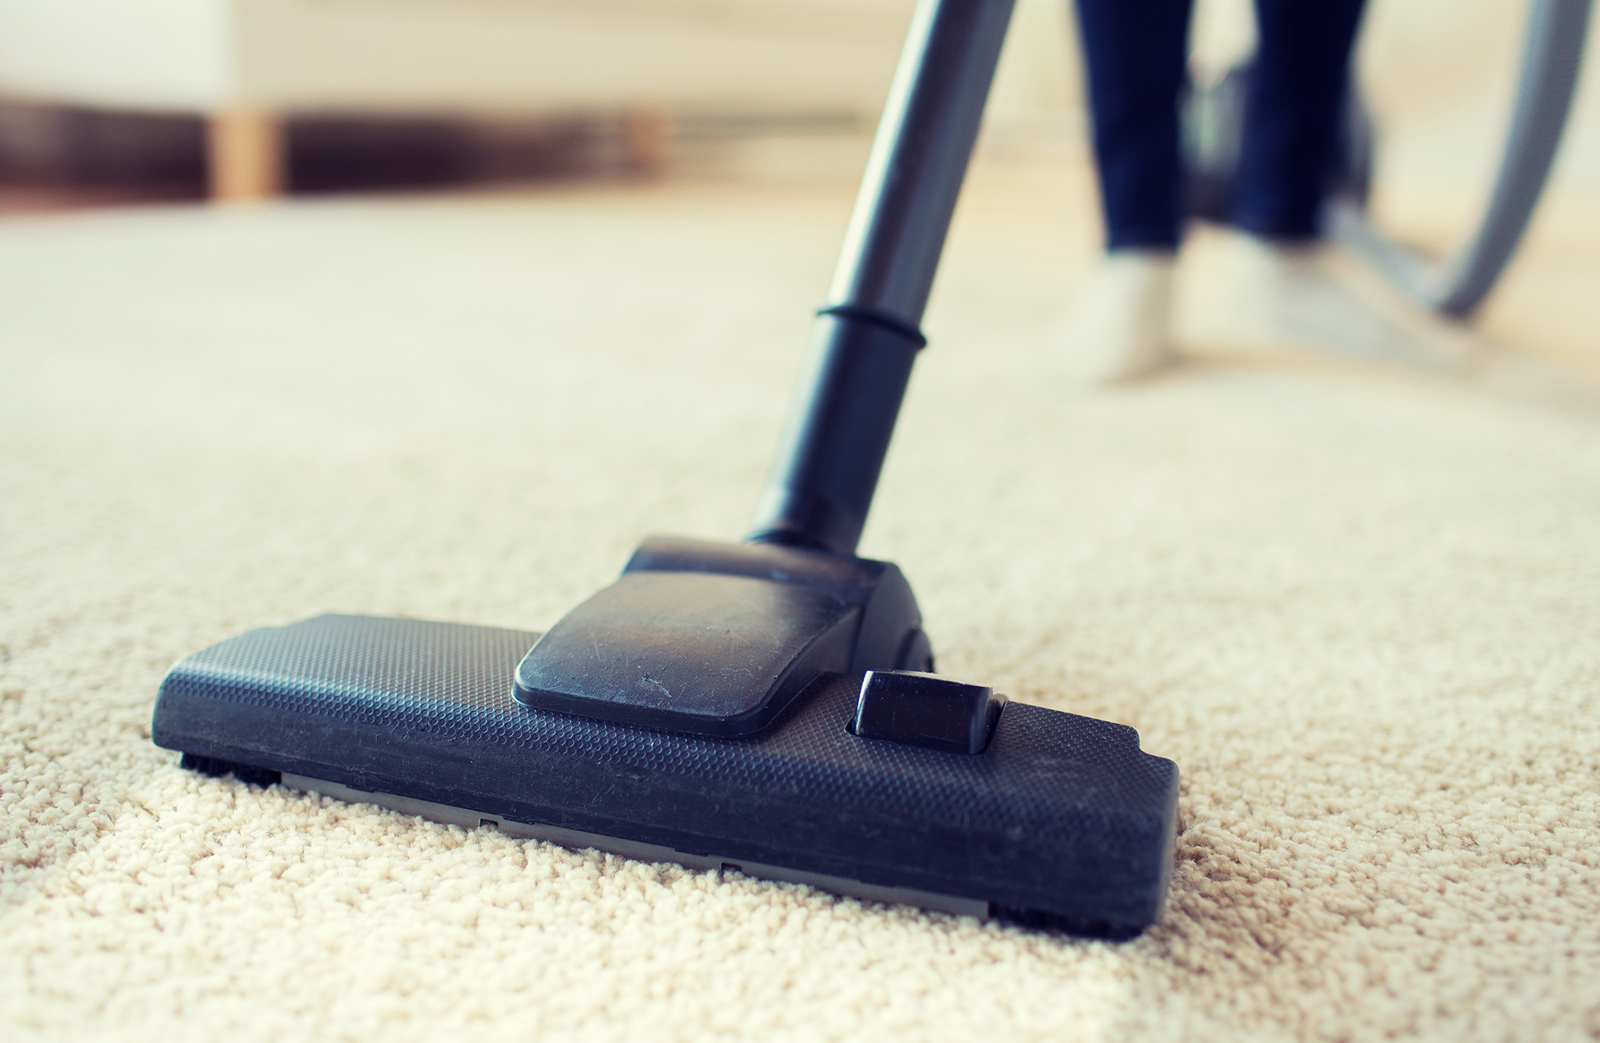 COMMERCIAL CARPET MAINTENANCE SERVICES IN PA AND NJ